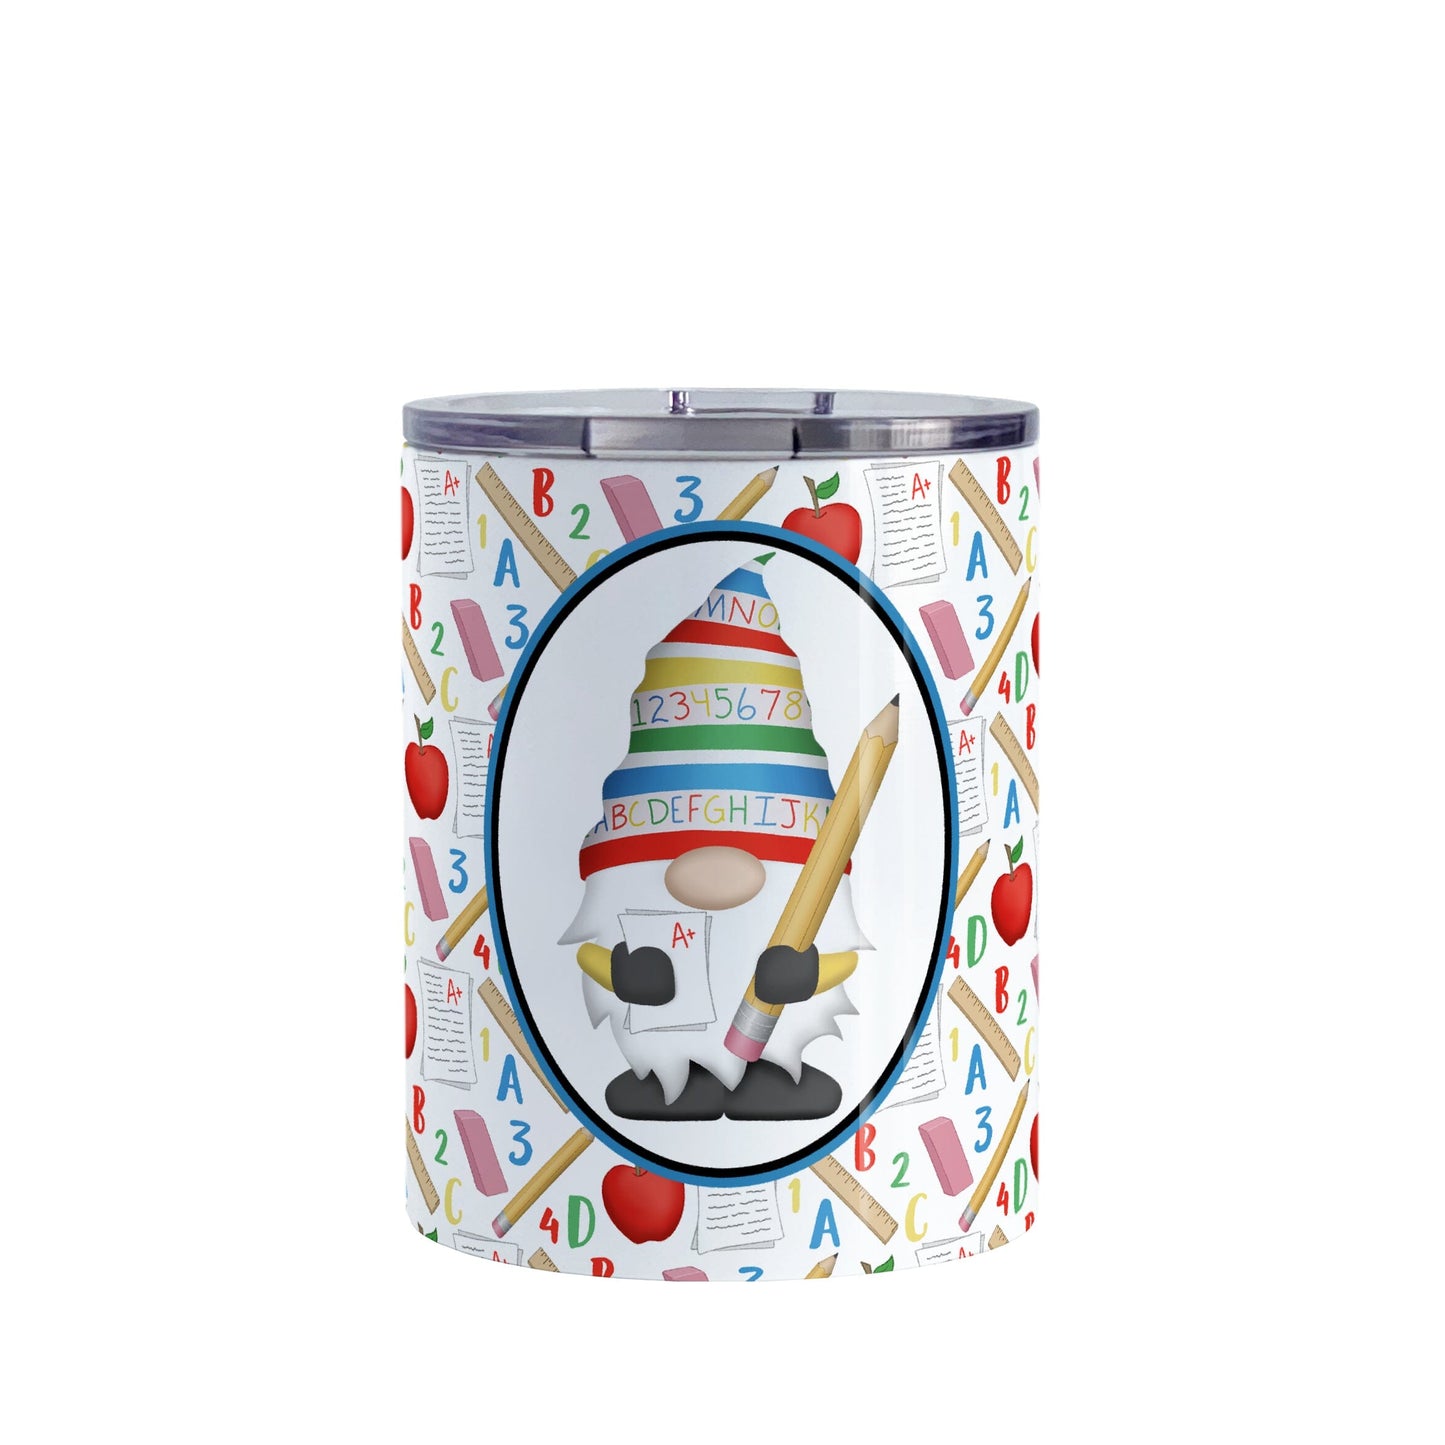 Teacher Gnome School Pattern Tumbler Cup (10oz) at Amy's Coffee Mugs. A stainless steel tumbler cup designed with an illustration of an adorable gnome wearing a festive hat with numbers and letters in primary colors and holding a large oversized pencil and graded A+ paper inside an oval. This cute gnome oval is placed over a school-themed pattern that wraps around the cup with apples, rulers, erasers, graded papers, numbers, and letters.